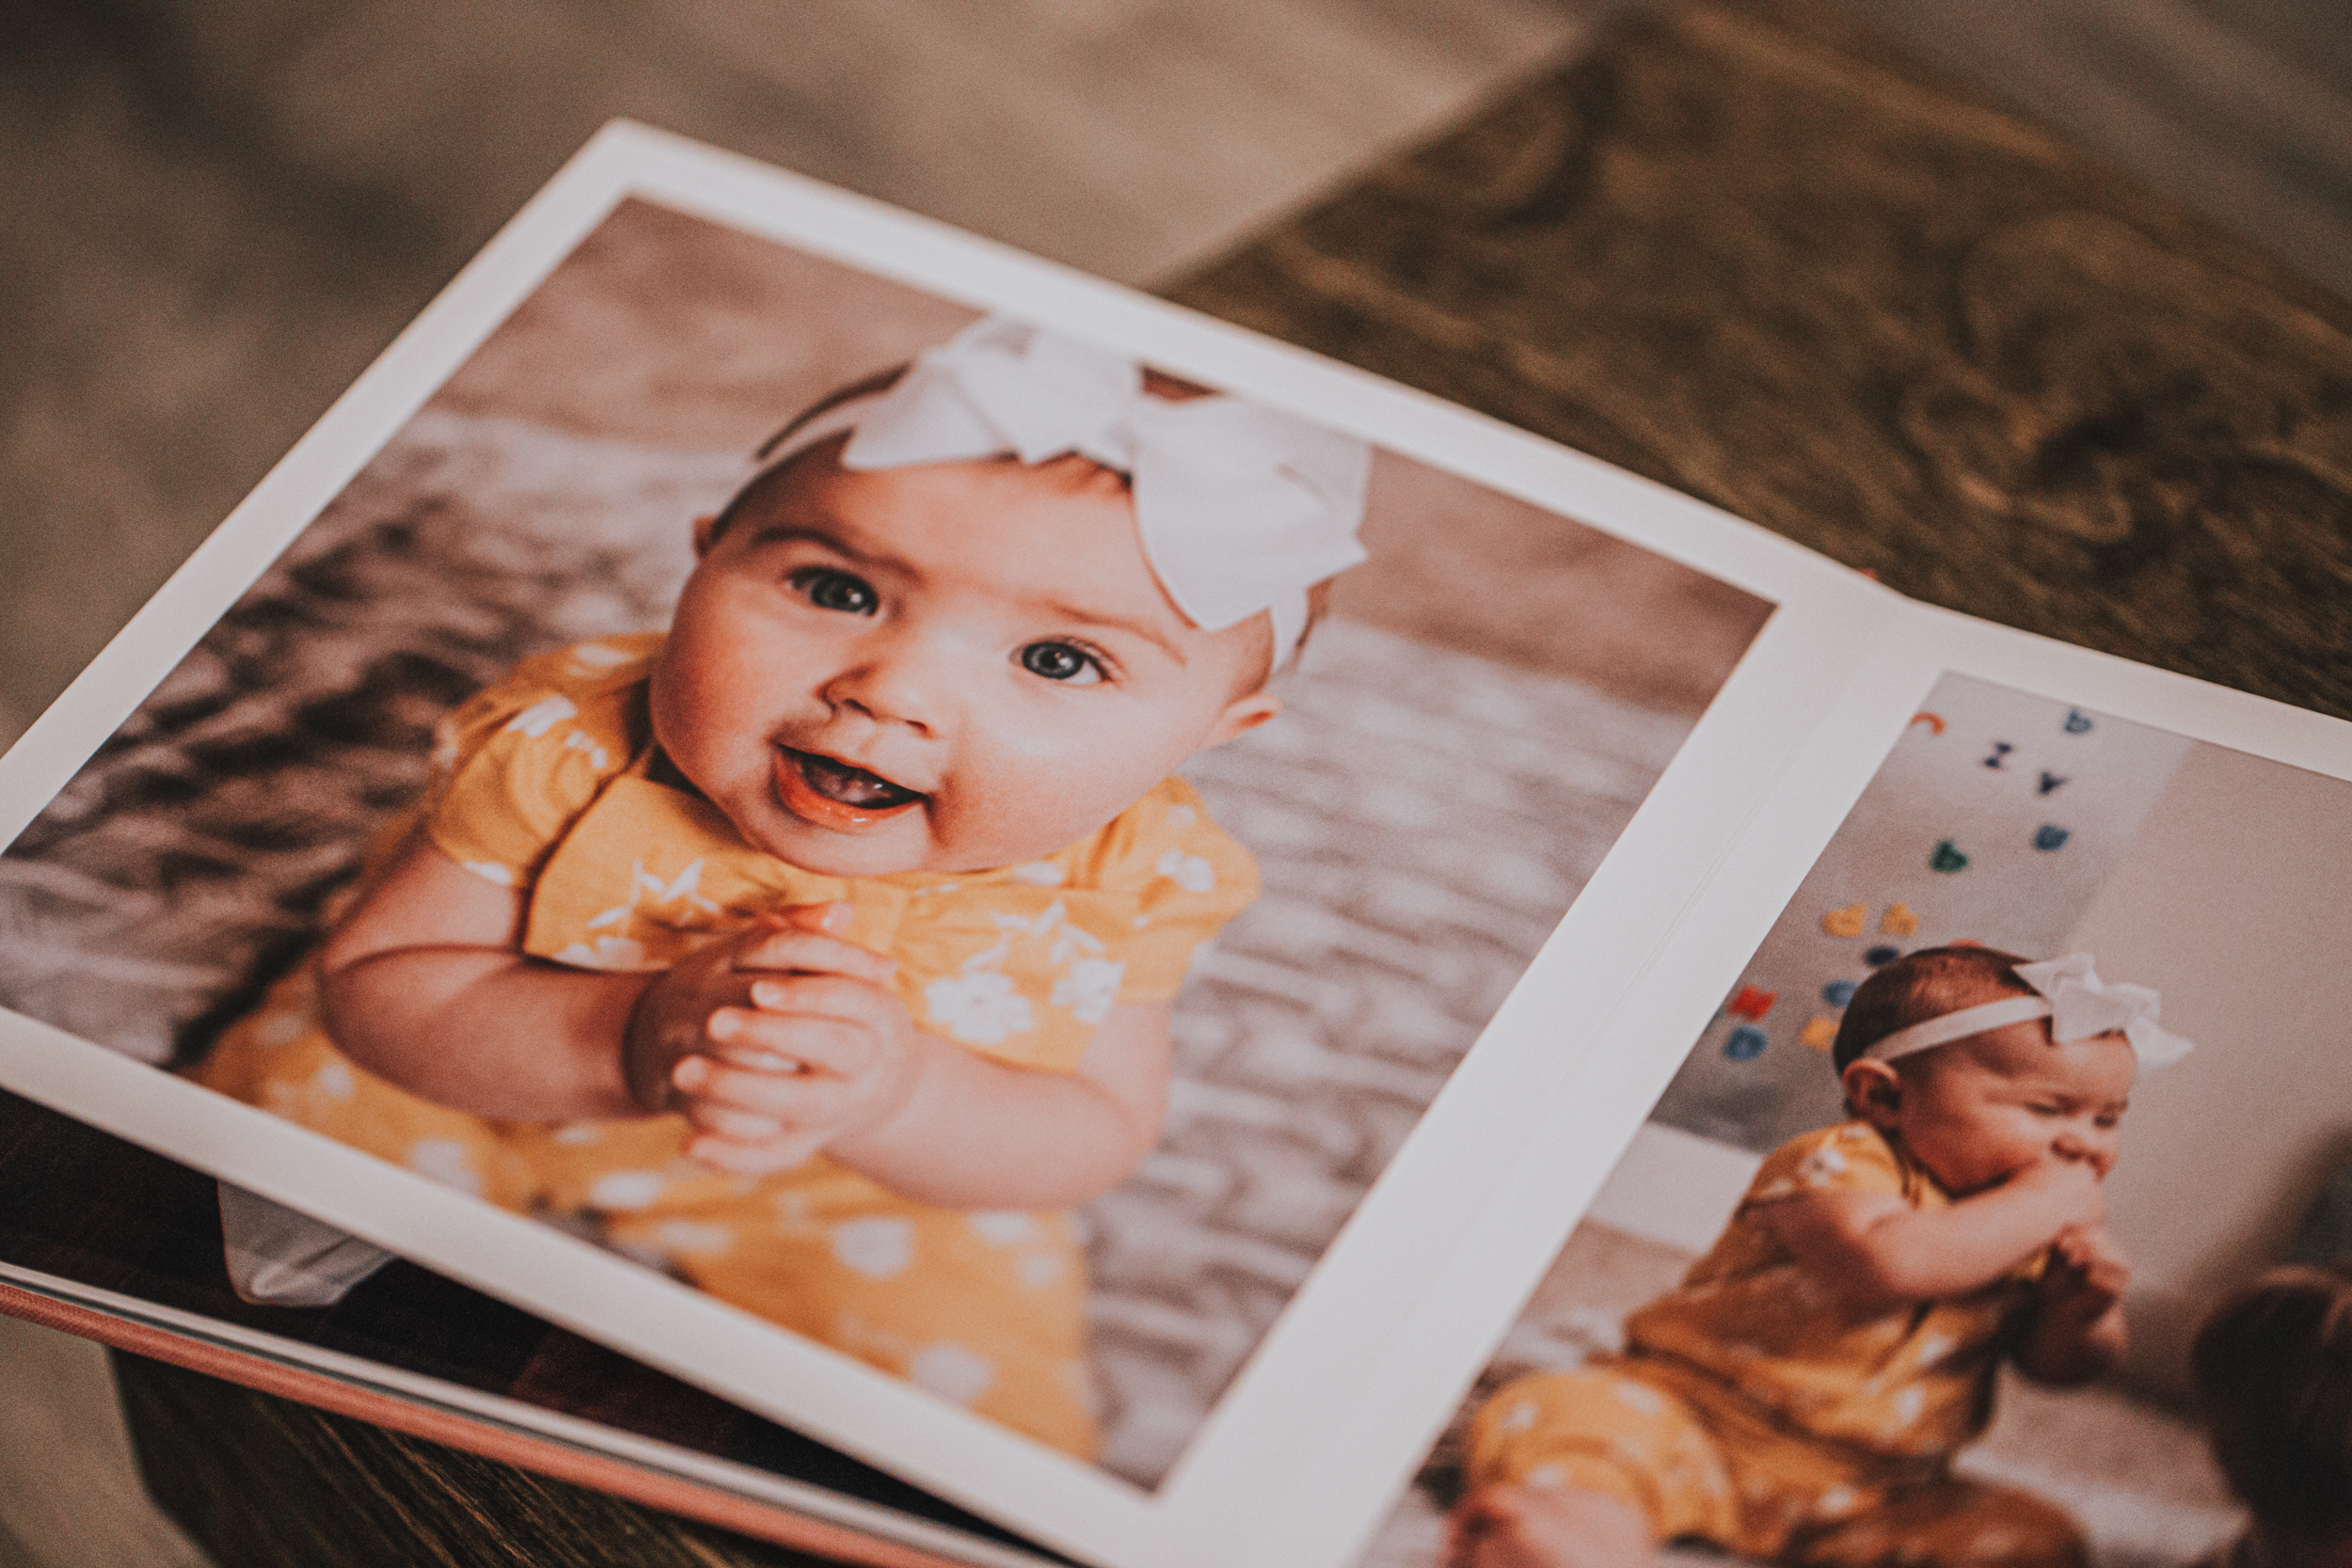 Print Your Images, Boost Your Child’s Self-Esteem